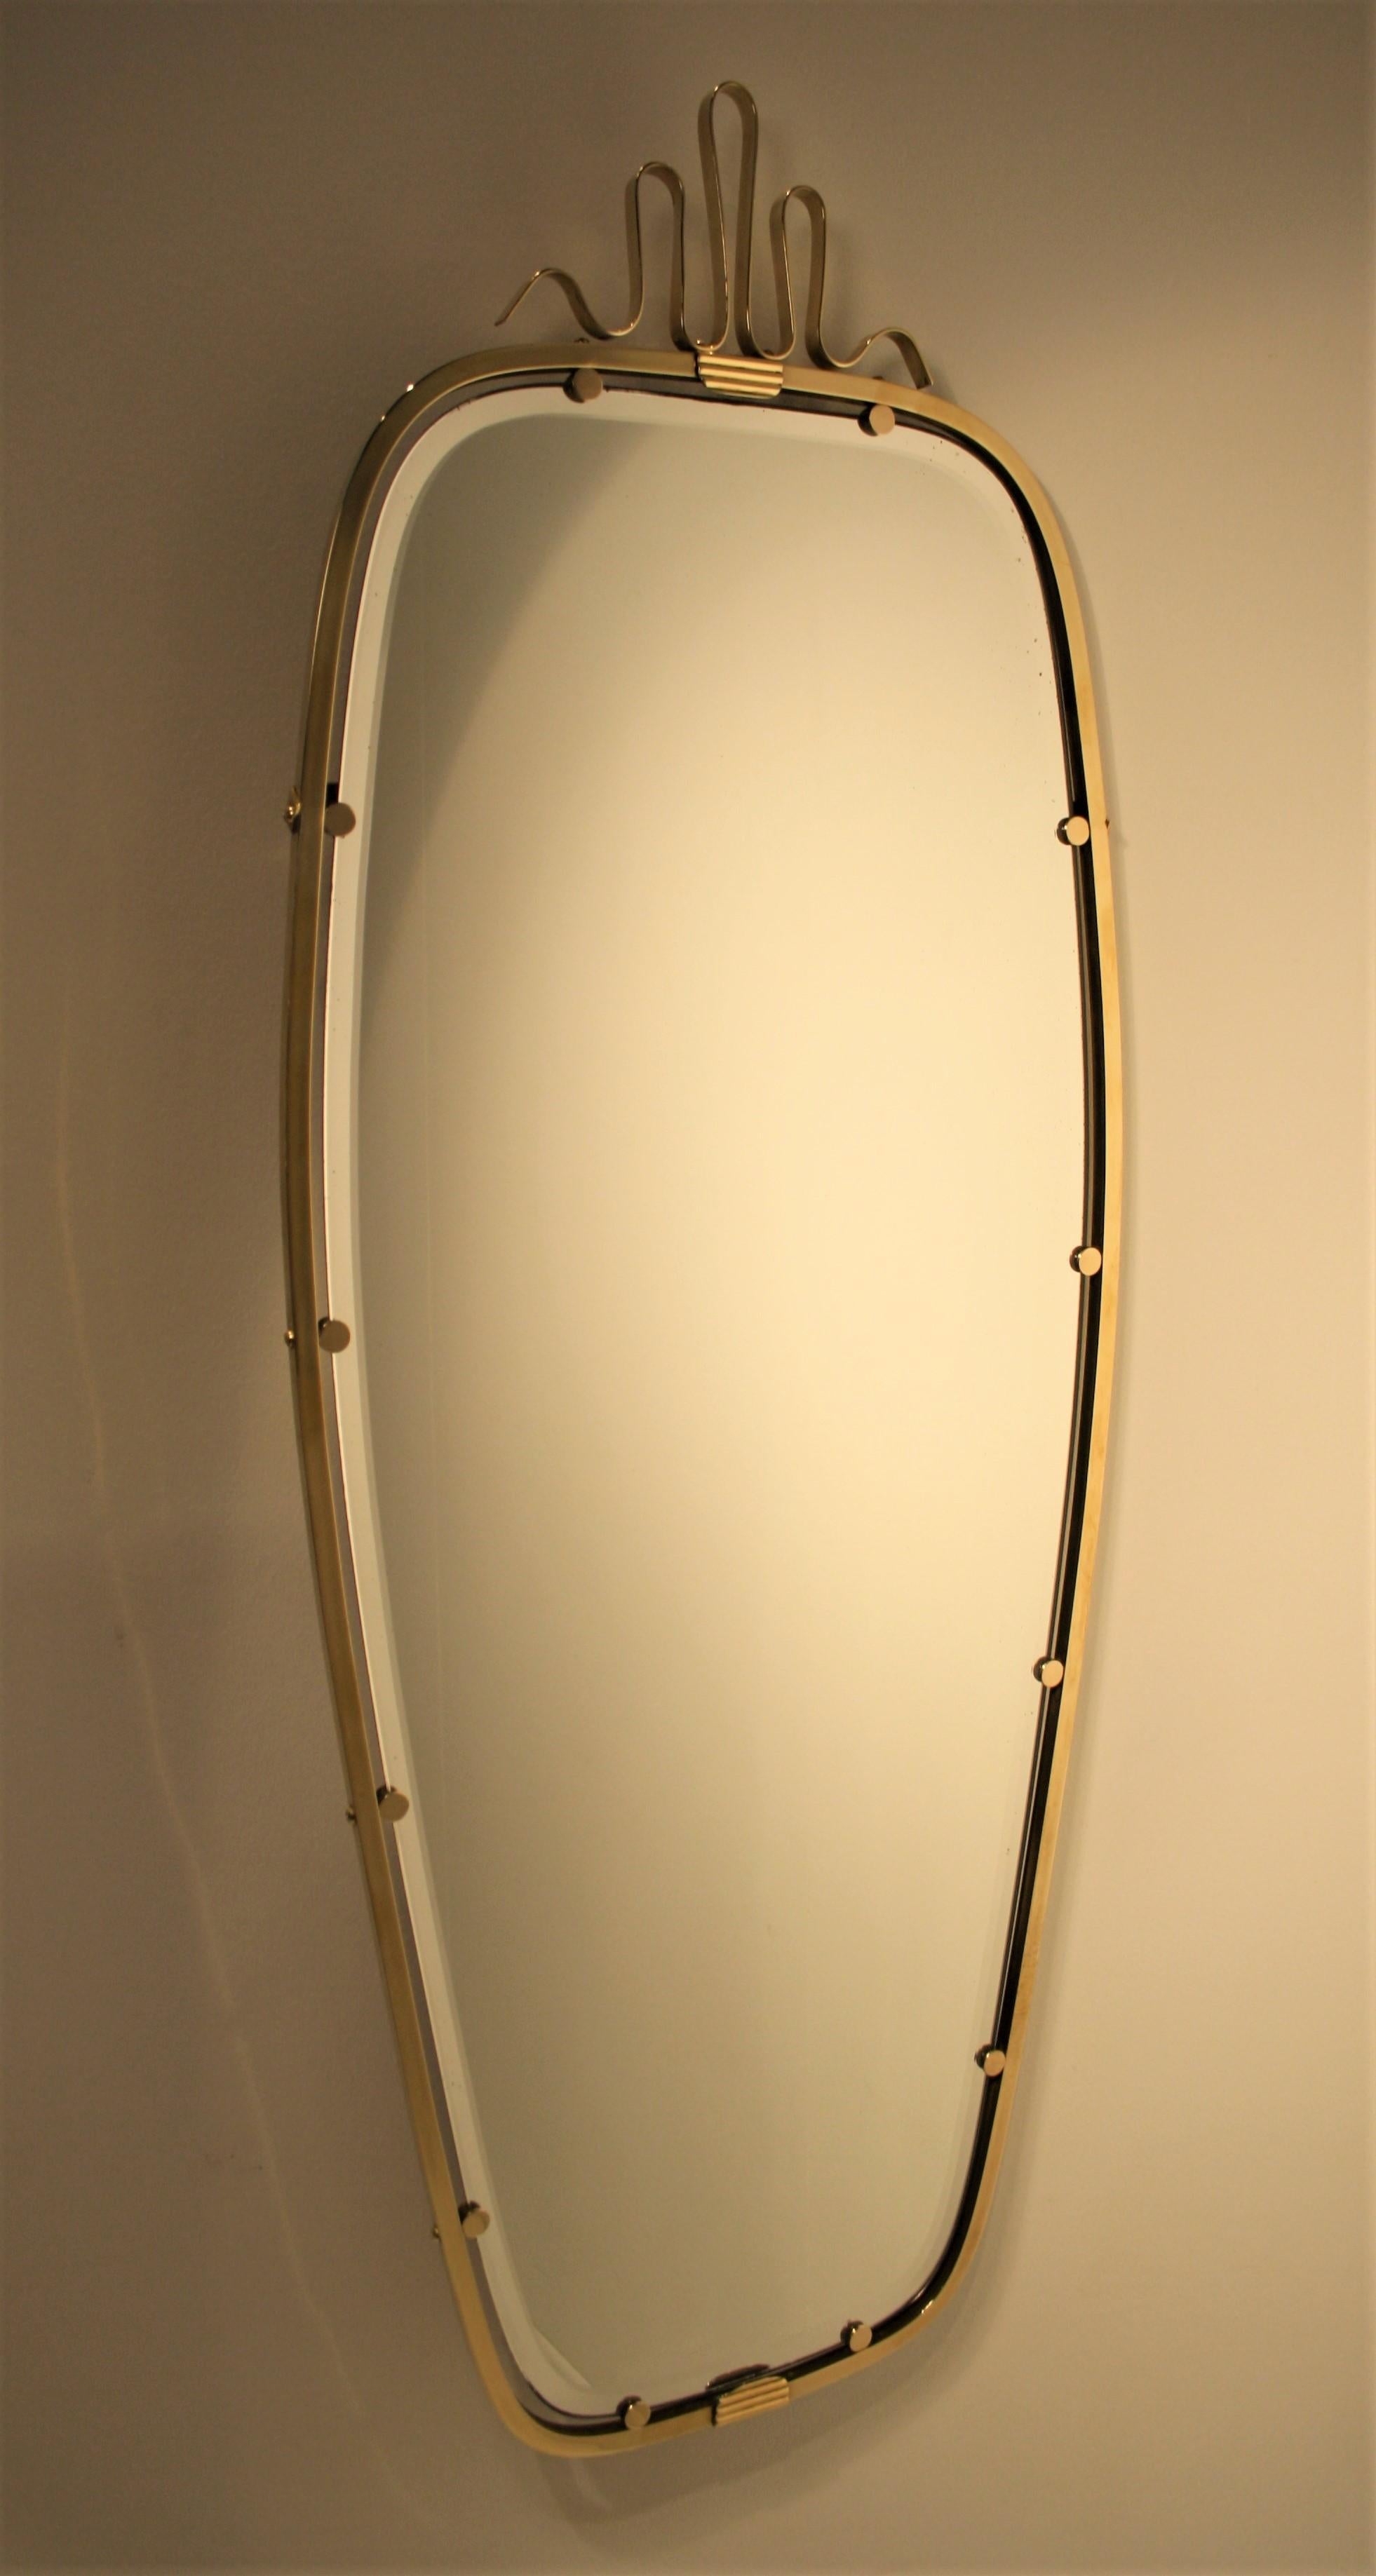 Very refined brass mirror by Gio Ponti for Fontana Arte.
Remaining old label of Fontana Arte on the back of the mirror
The mirror still has its original beveled mirror in perfect condition, made in the early 1930s and cannot be compared to similar